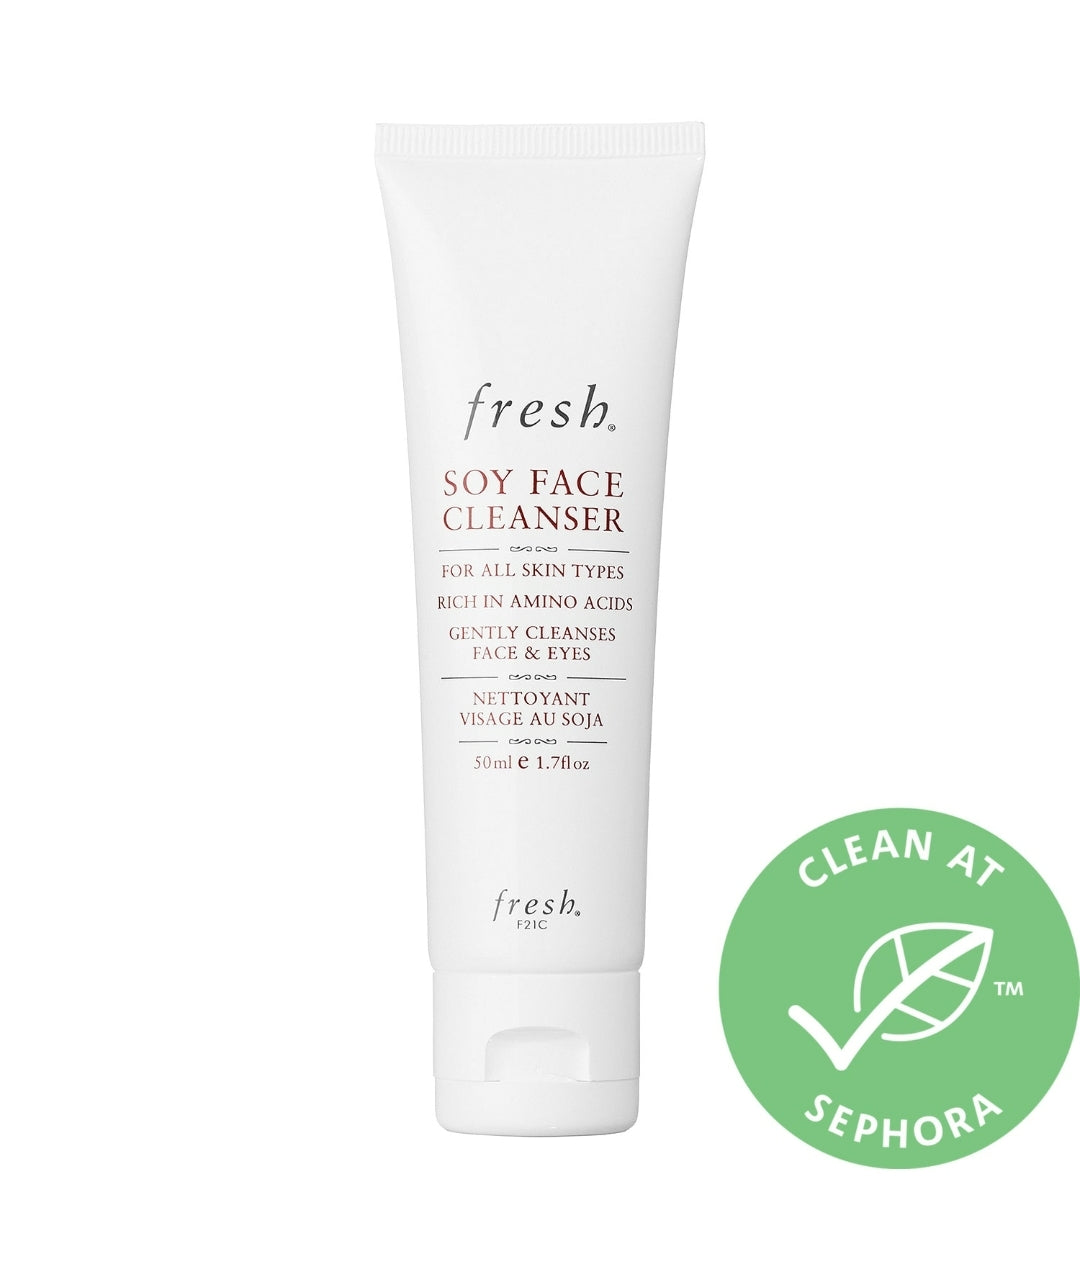 Soy face cleanser -mini